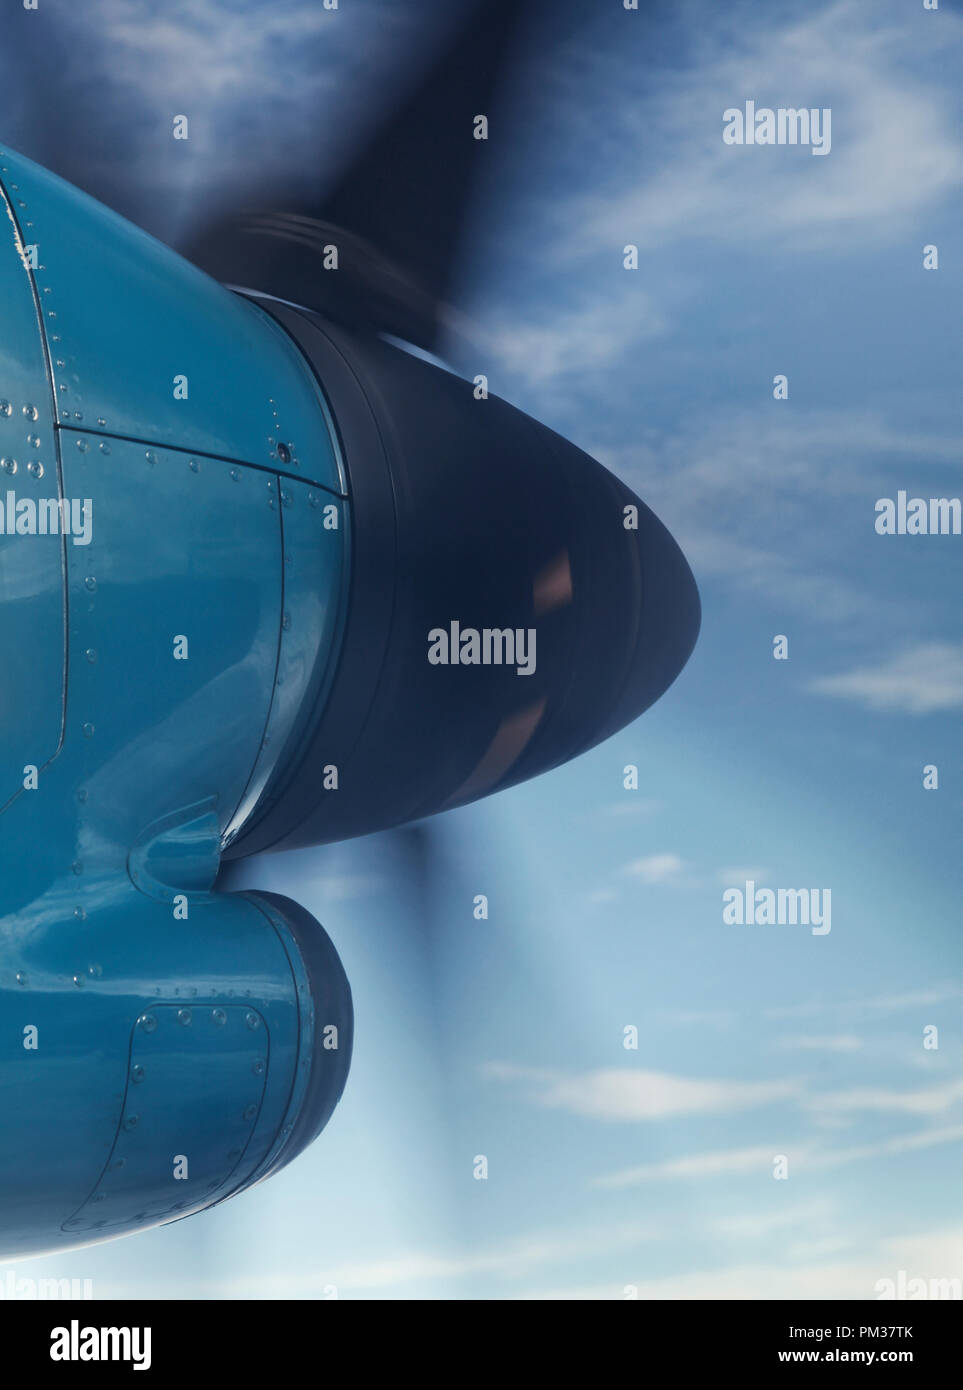 Propeller of a small airplane Stock Photo